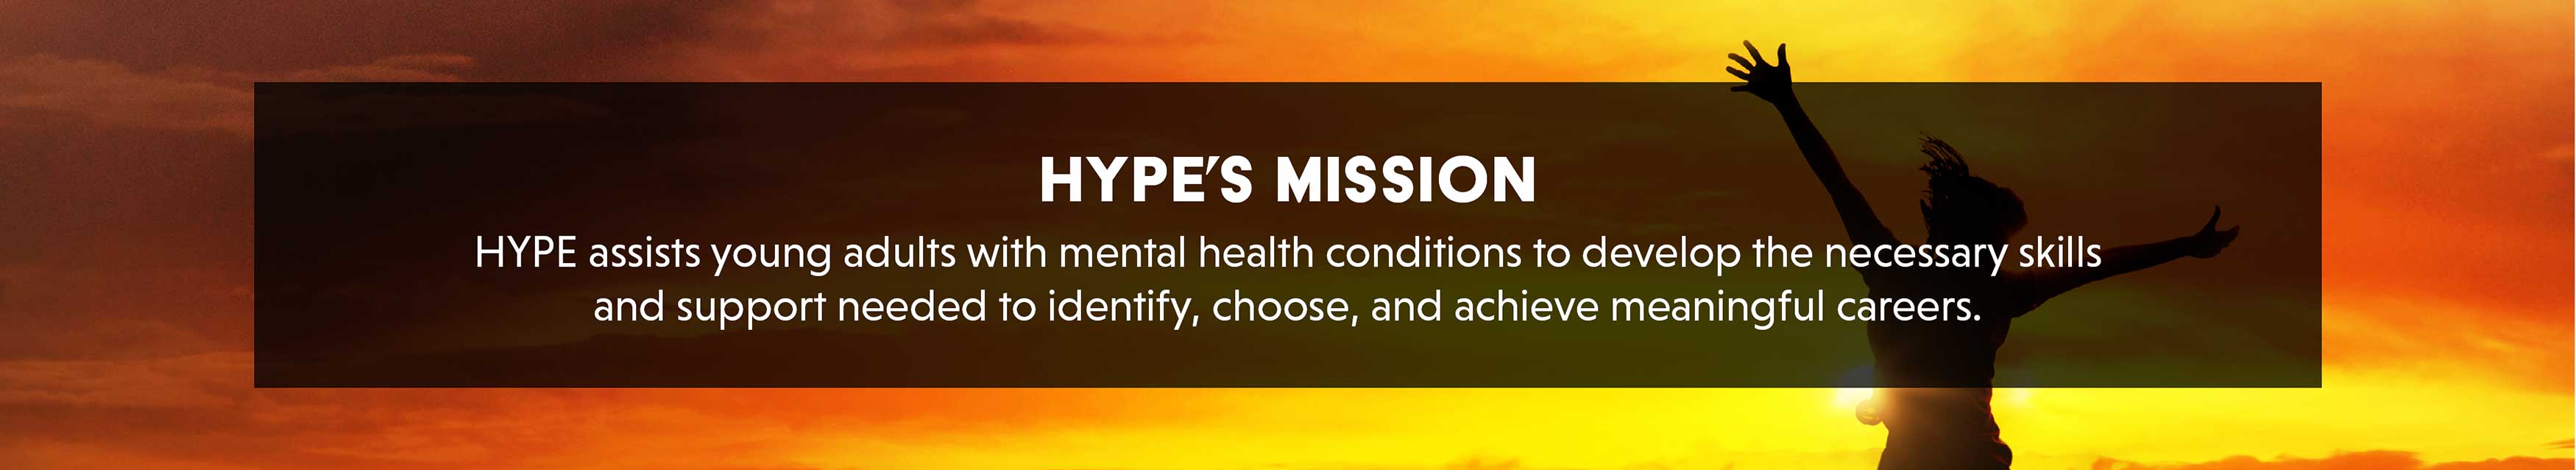 HYPE's Mission